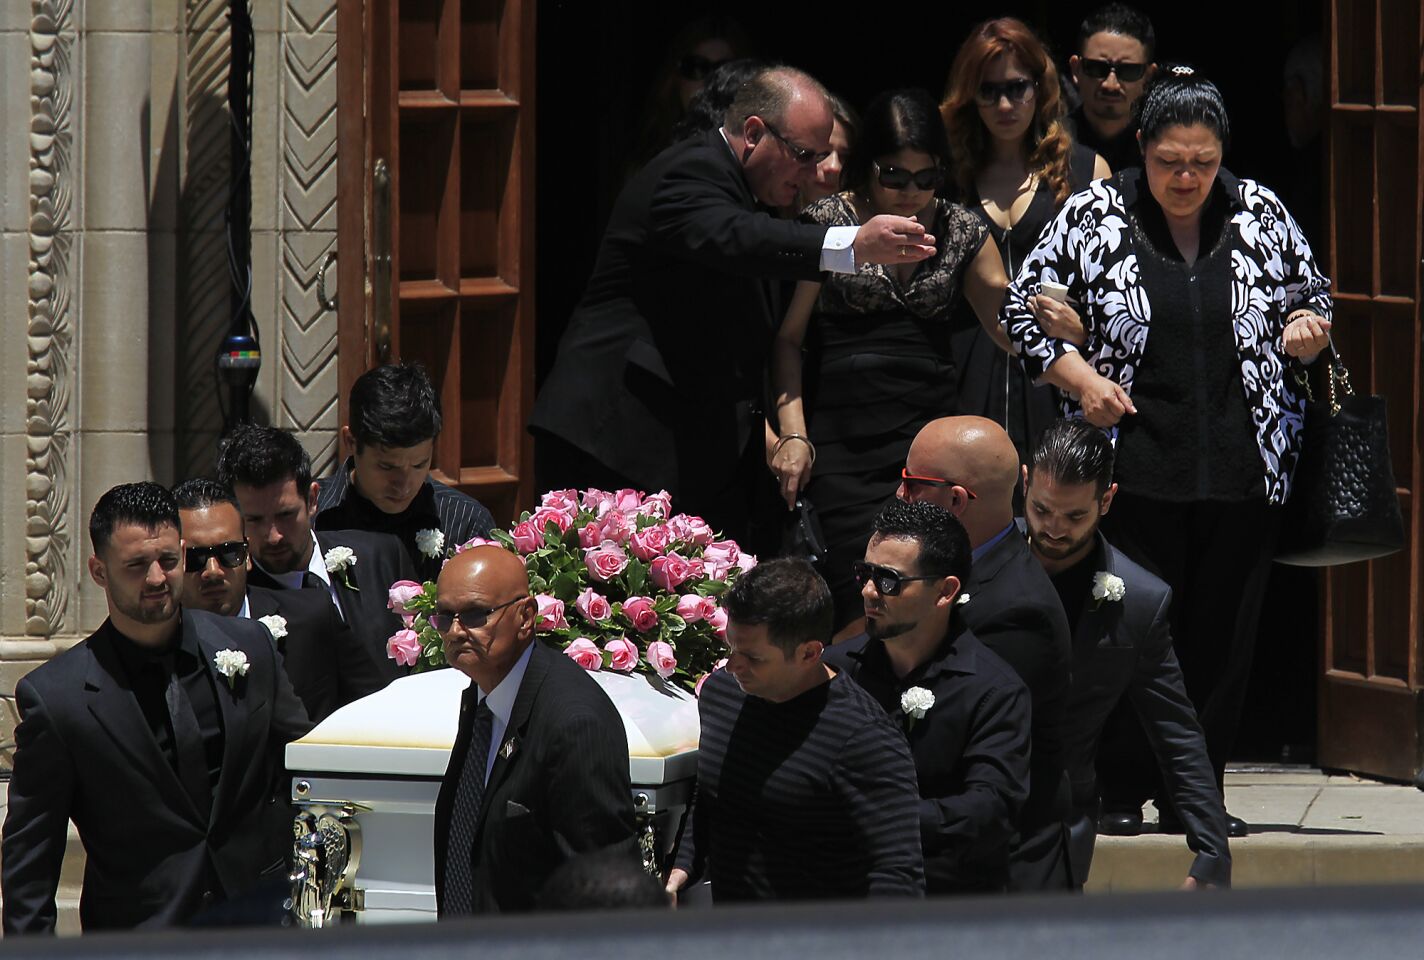 Pallbearers carry the casket of Marcela Franco as family member are escorted out following a funeral mass for Marcela and Carlos Franco at Saint Monica's Catholic Church.